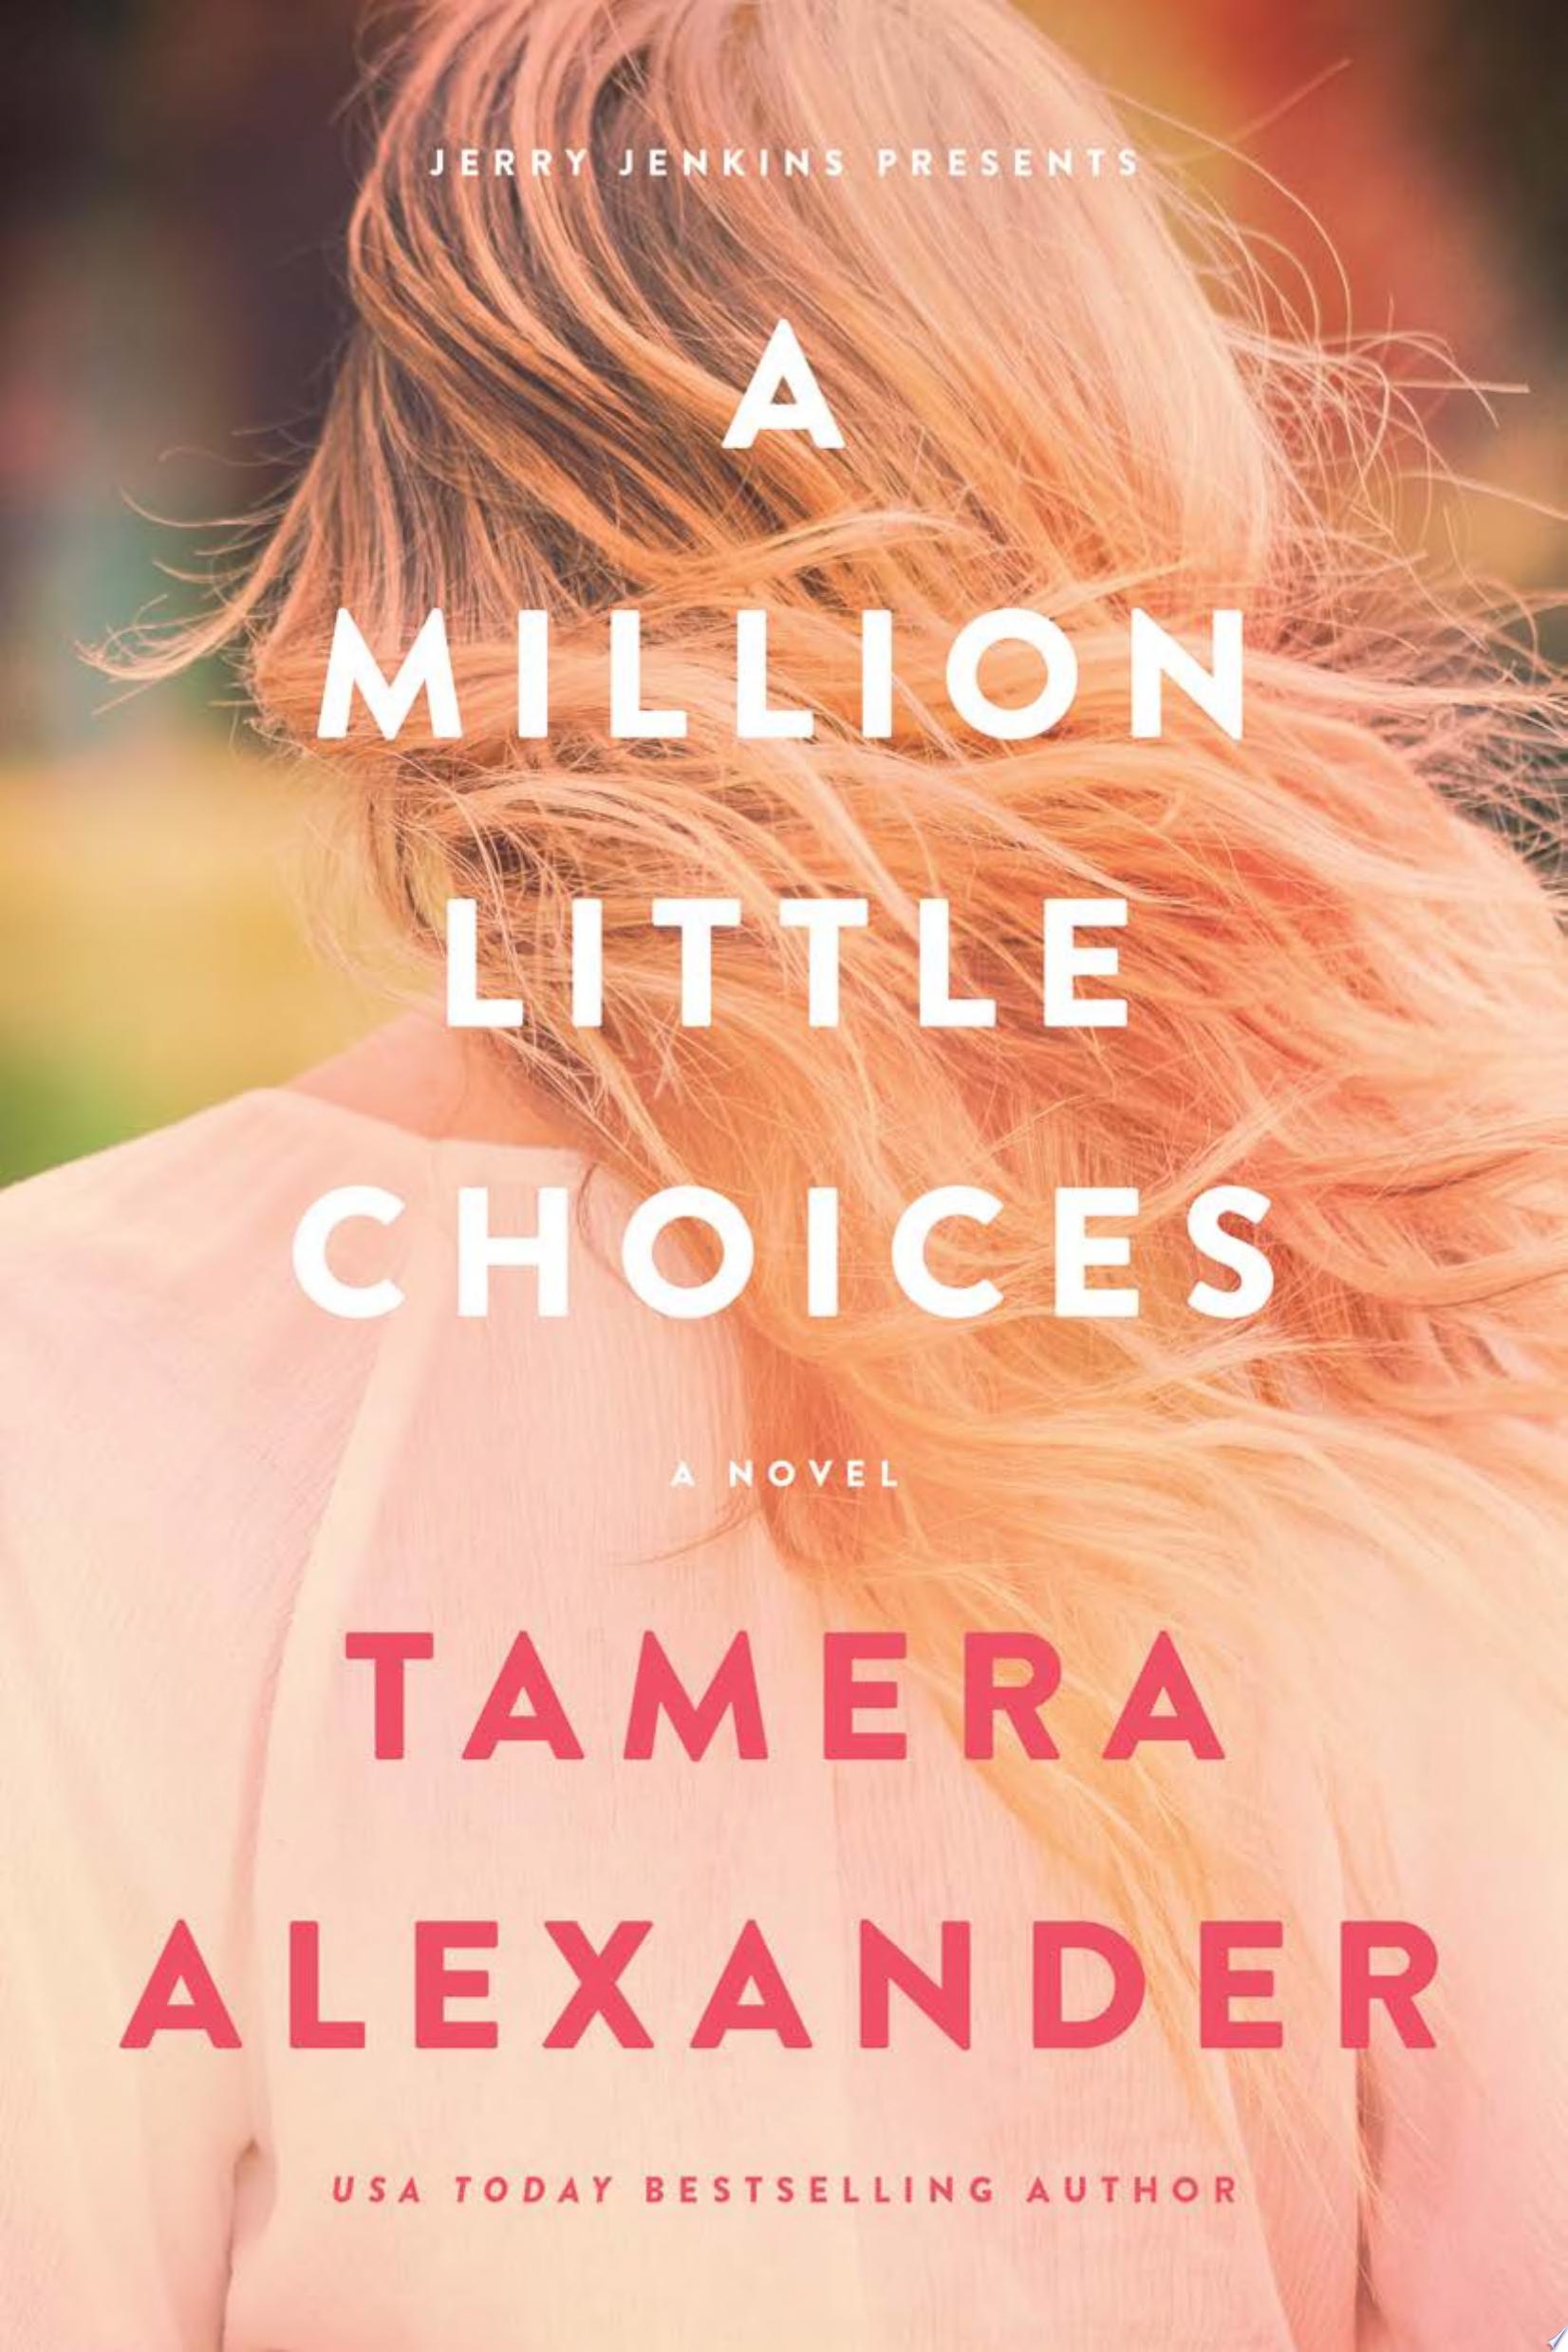 Image for "A Million Little Choices"